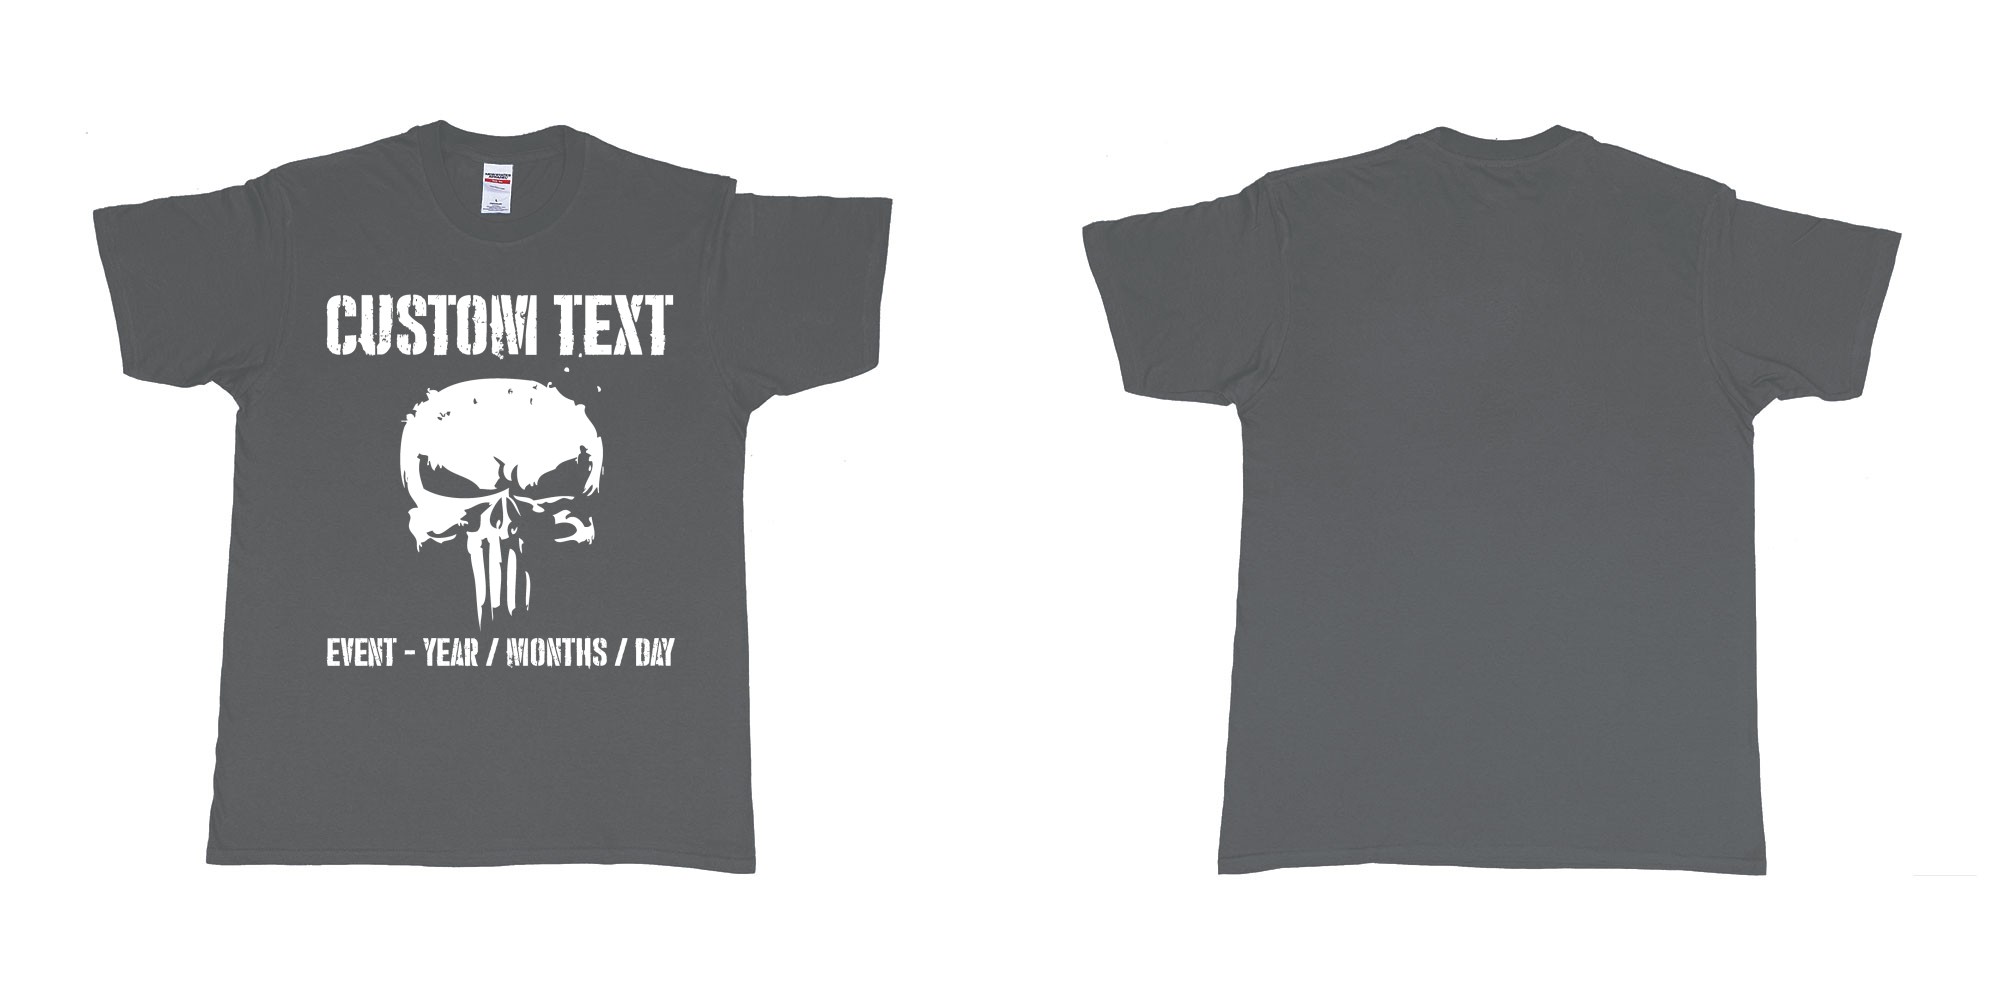 Custom tshirt design the punisher scull logo custom text in fabric color charcoal choice your own text made in Bali by The Pirate Way